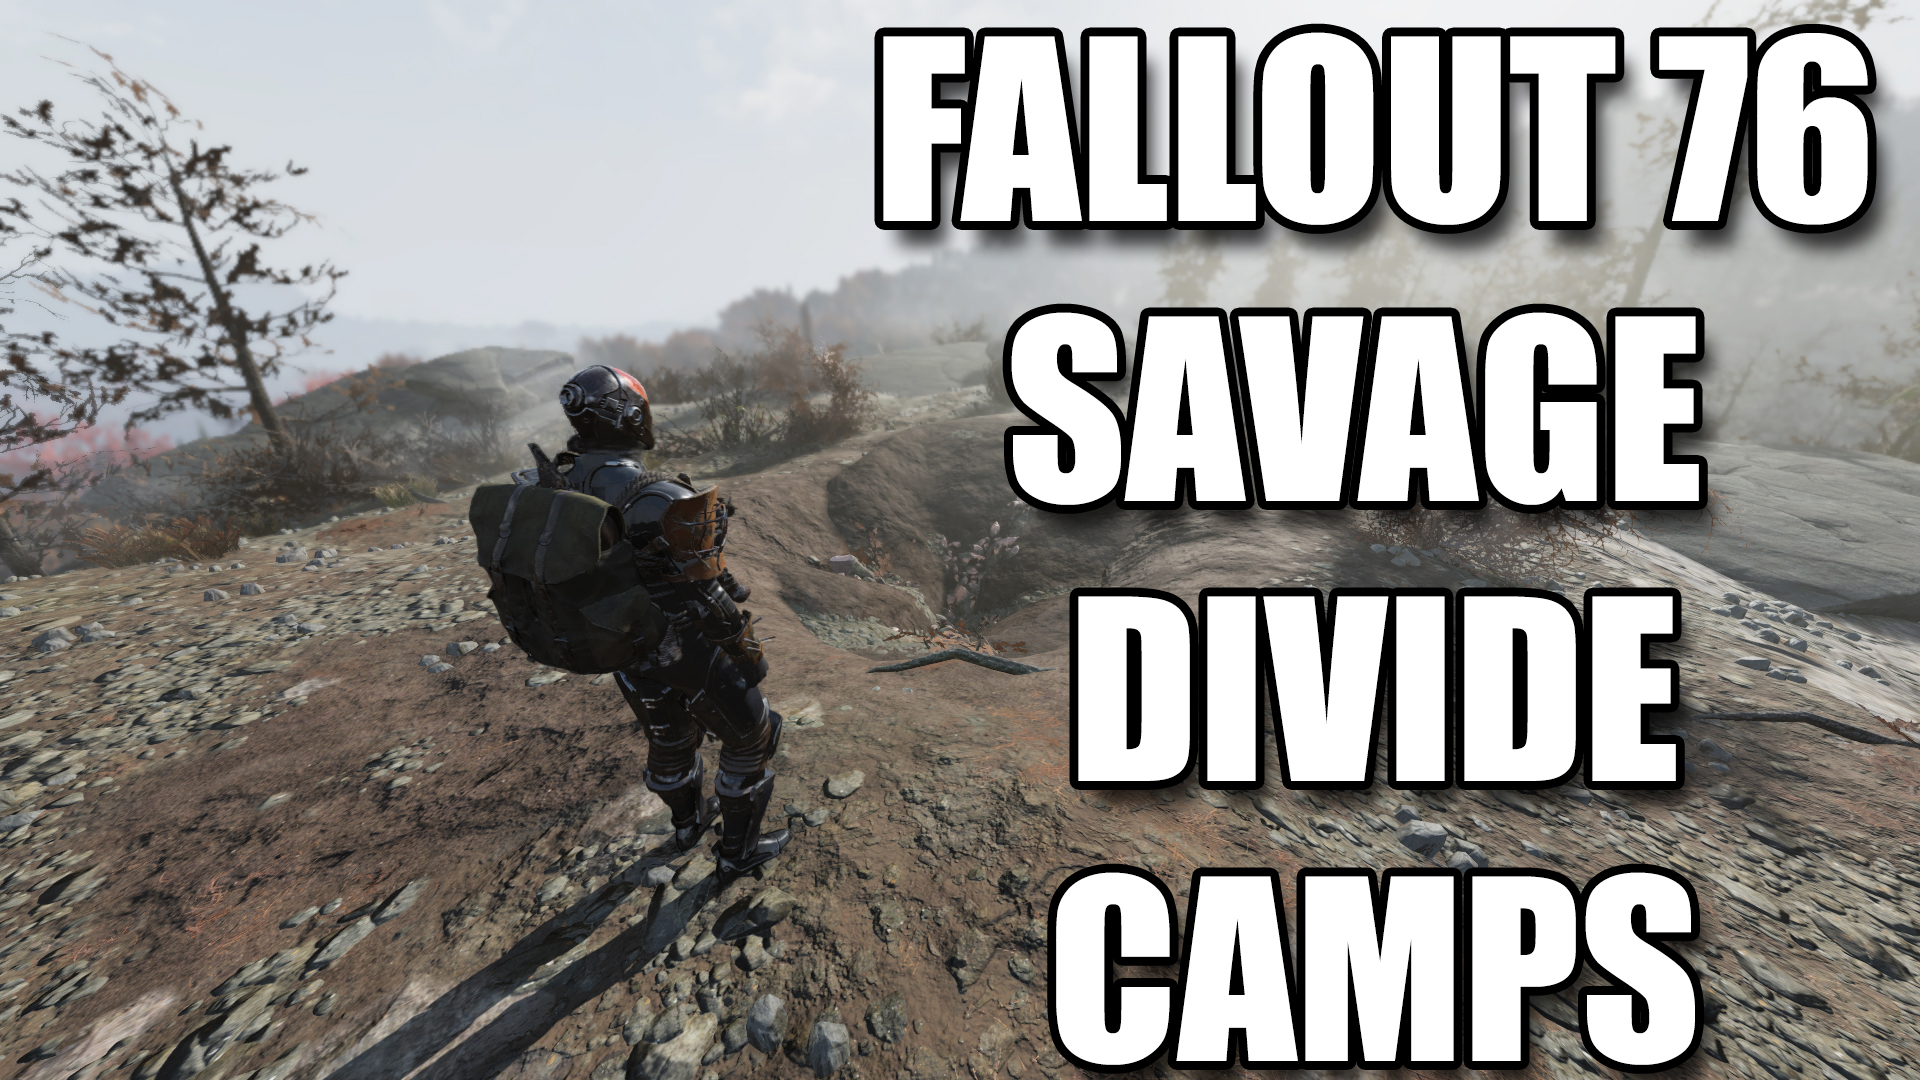 Fallout 76 Savage Divide Camps